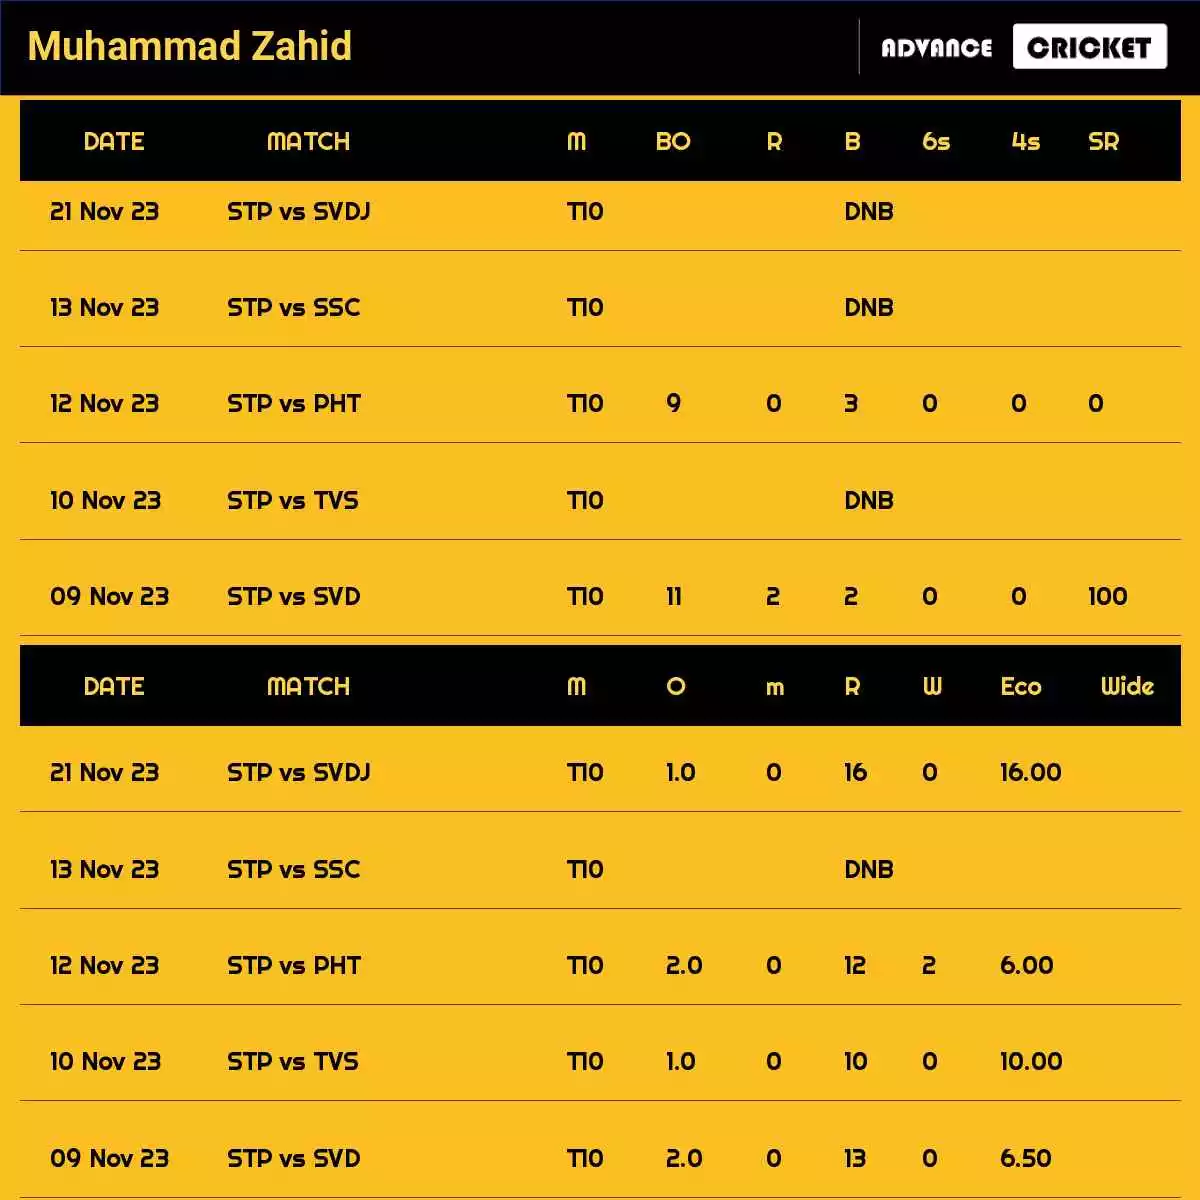 Muhammad Zahid Recent Matches Details Date Wise